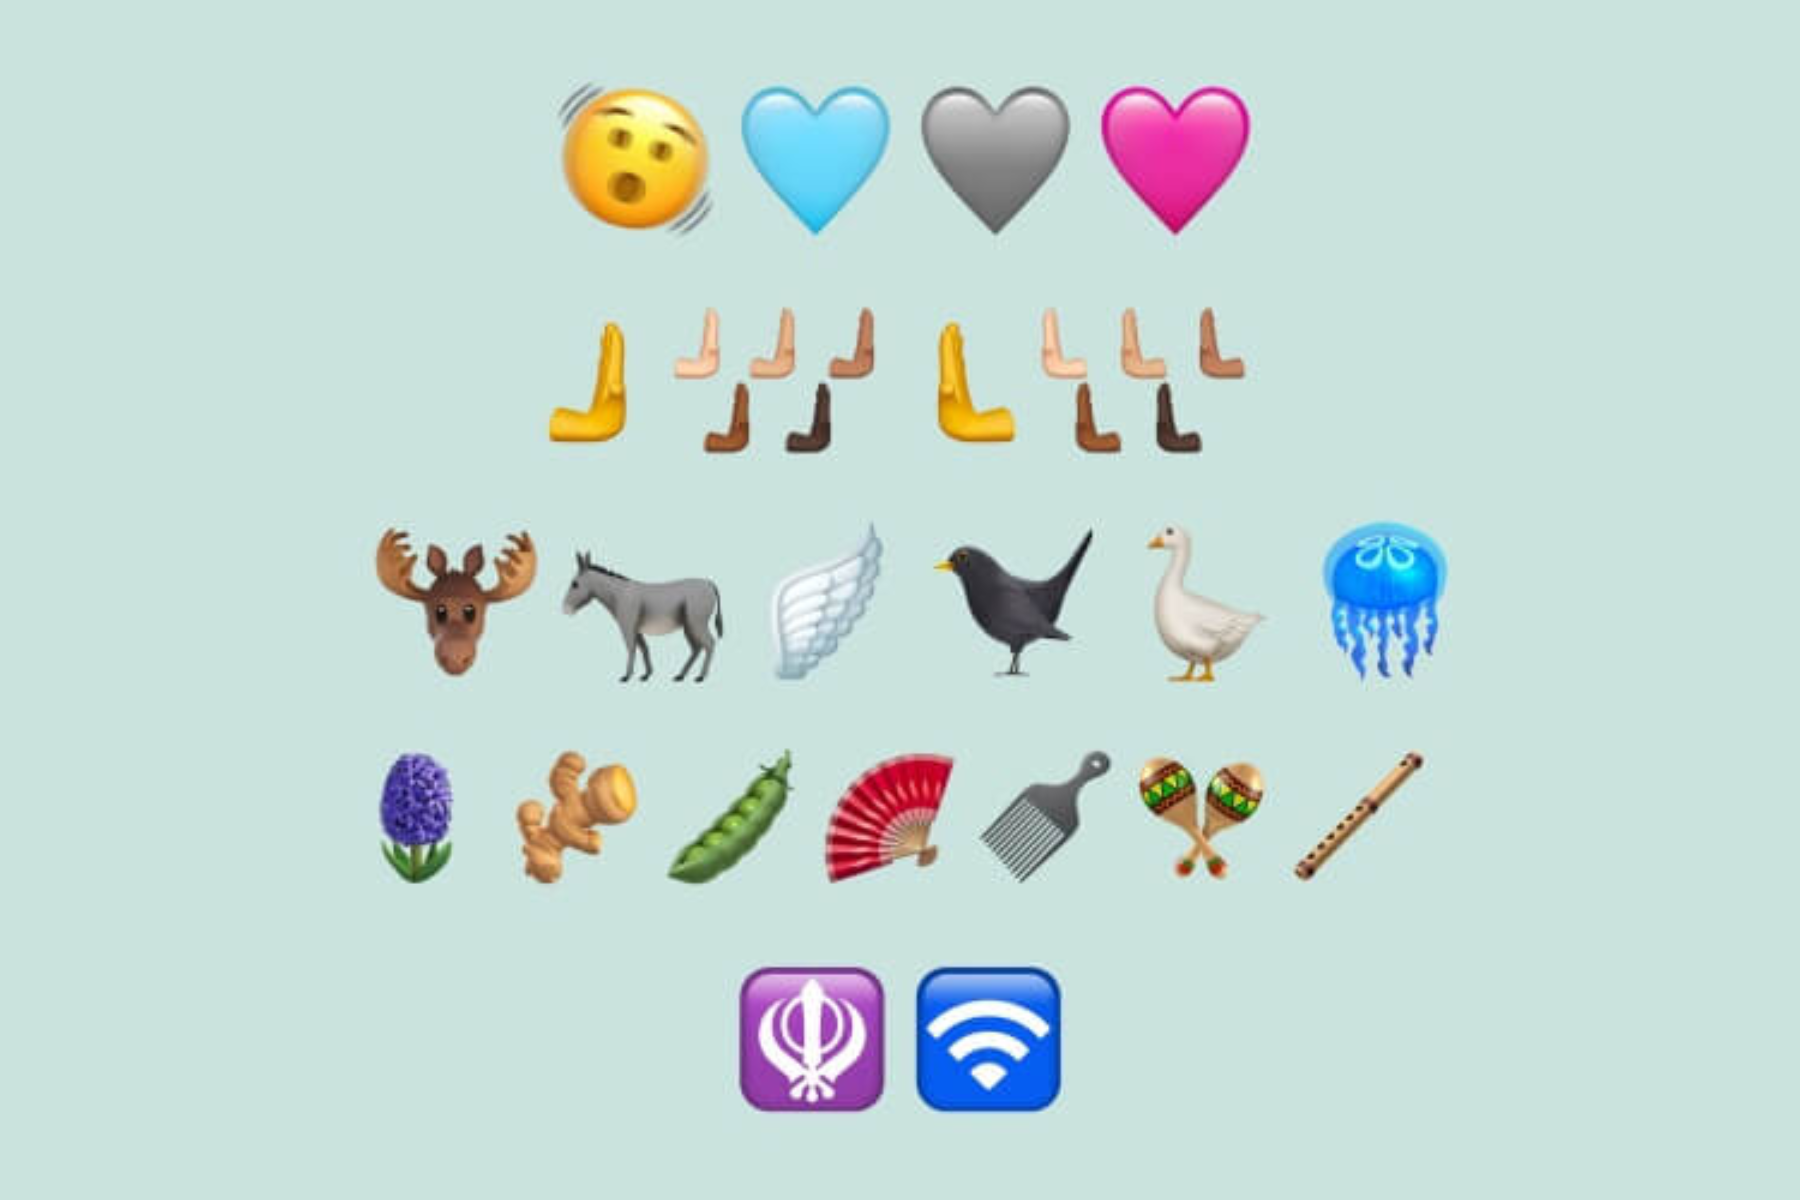 The lists of emojis added to the new iPhone update